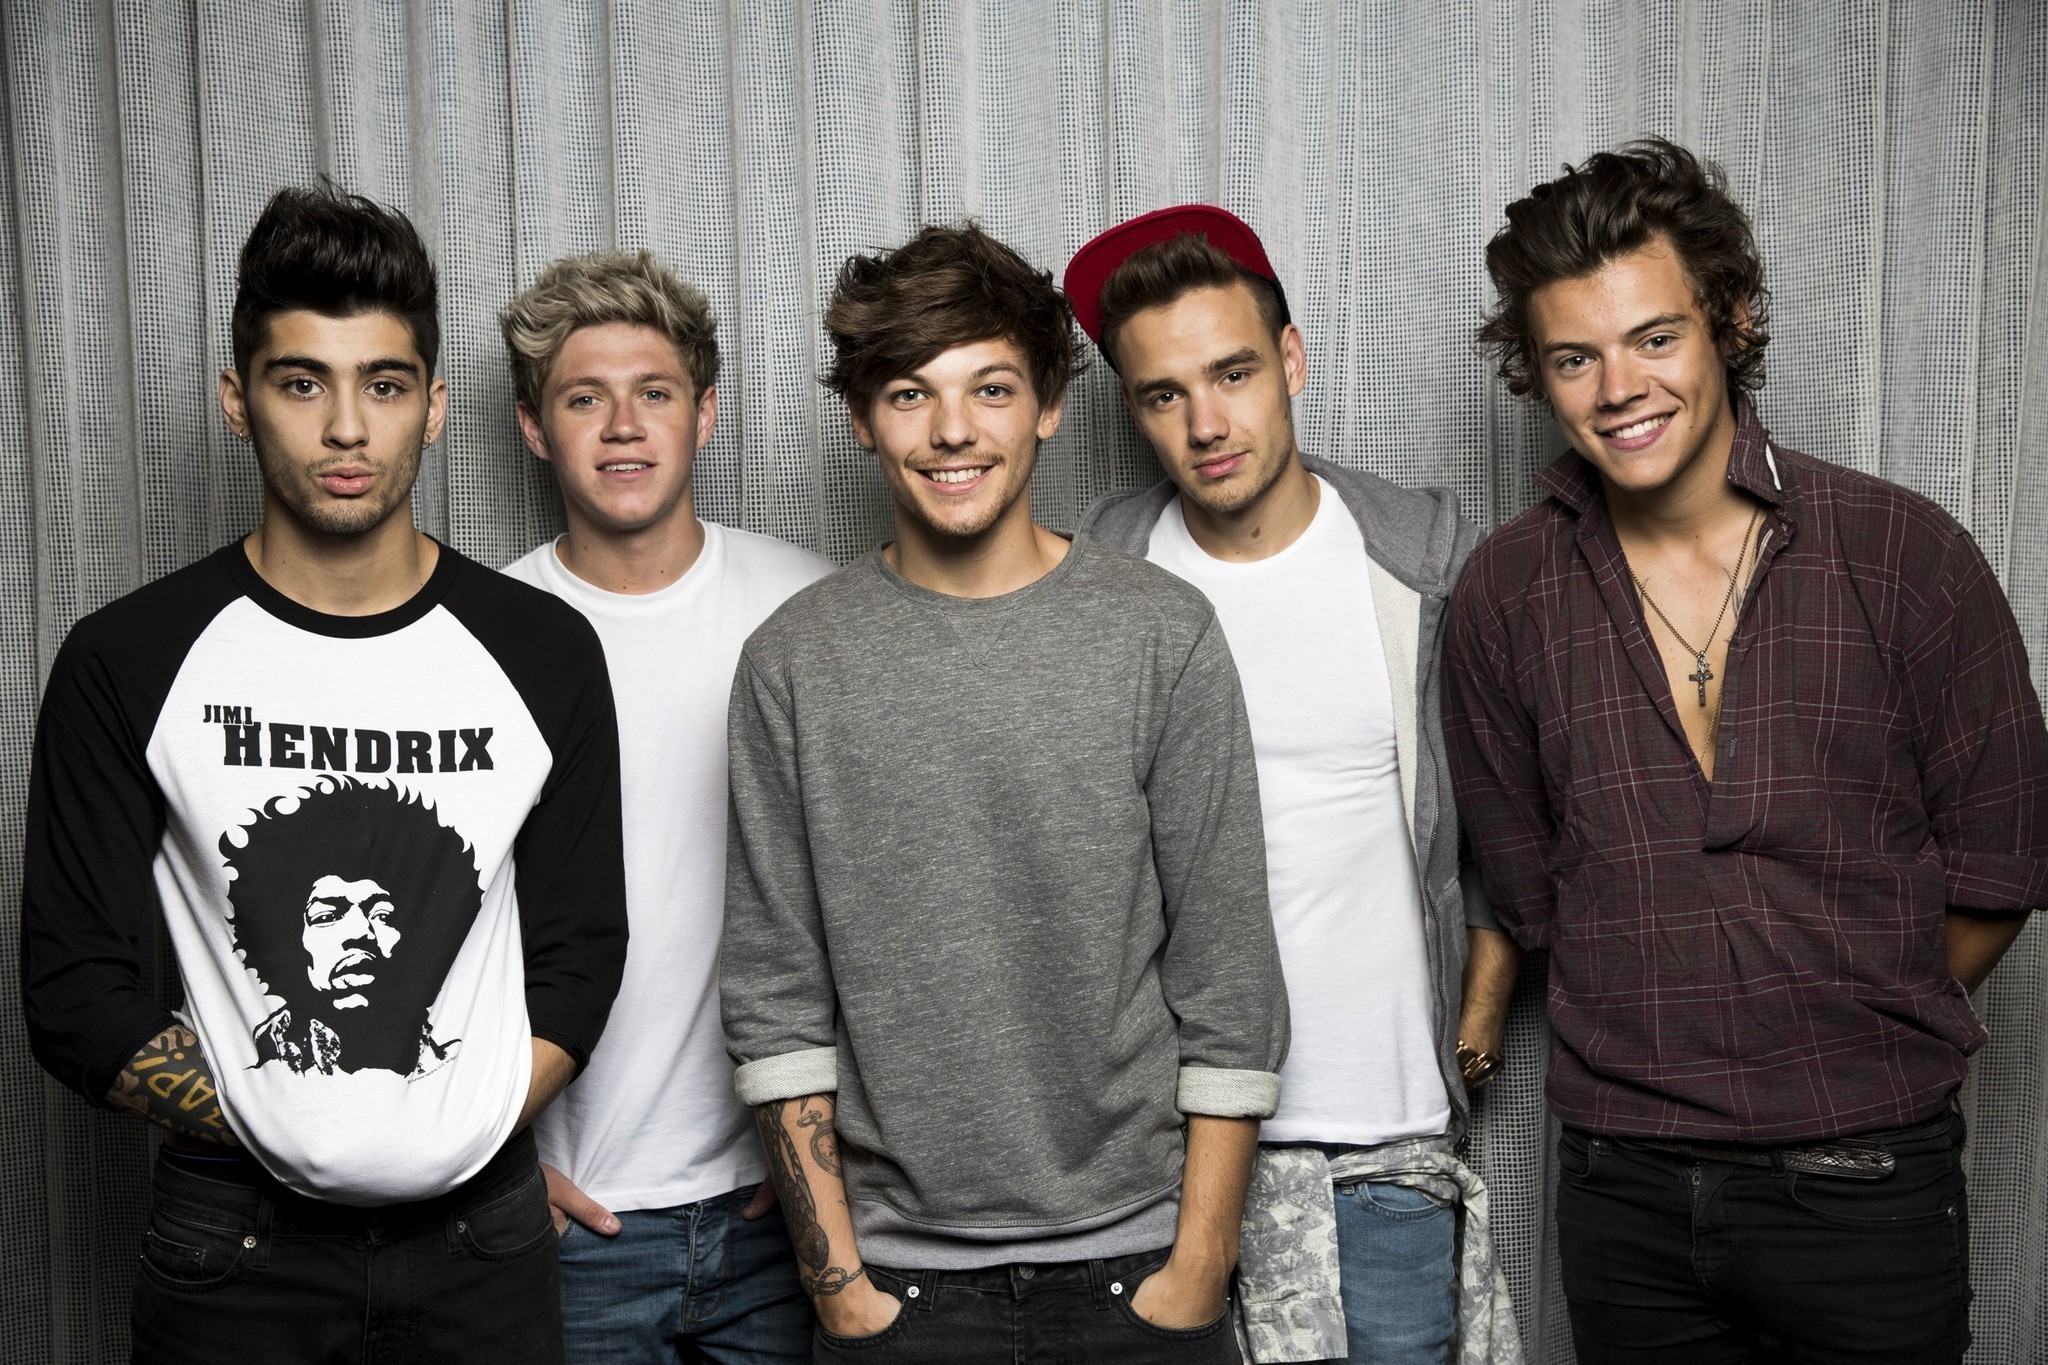 2048x1365 One Direction release first promo picture without Zayn! - Fun Kids .